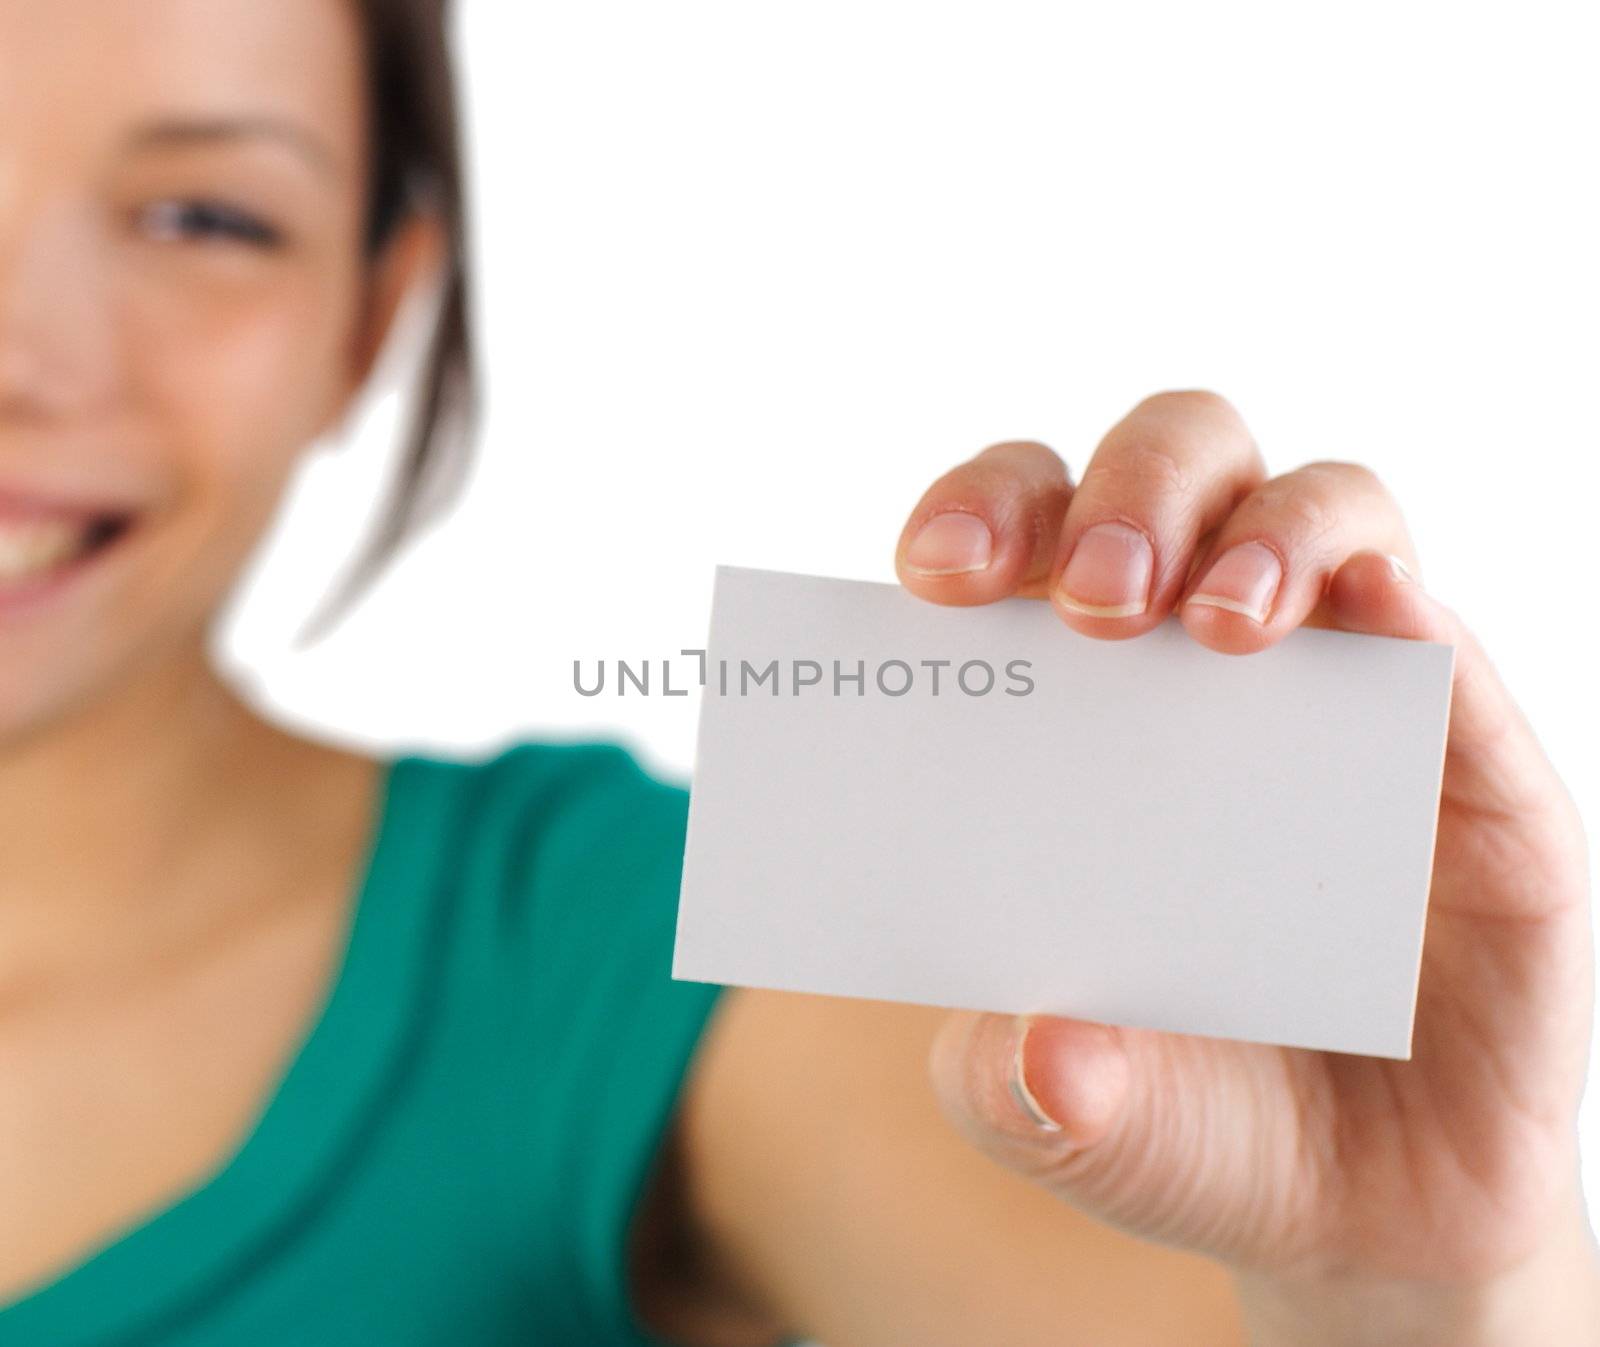 Business card. Beautiful young woman with big smile displaying a blank business card. Shallow depth of field, focus on card. Isolated on white background